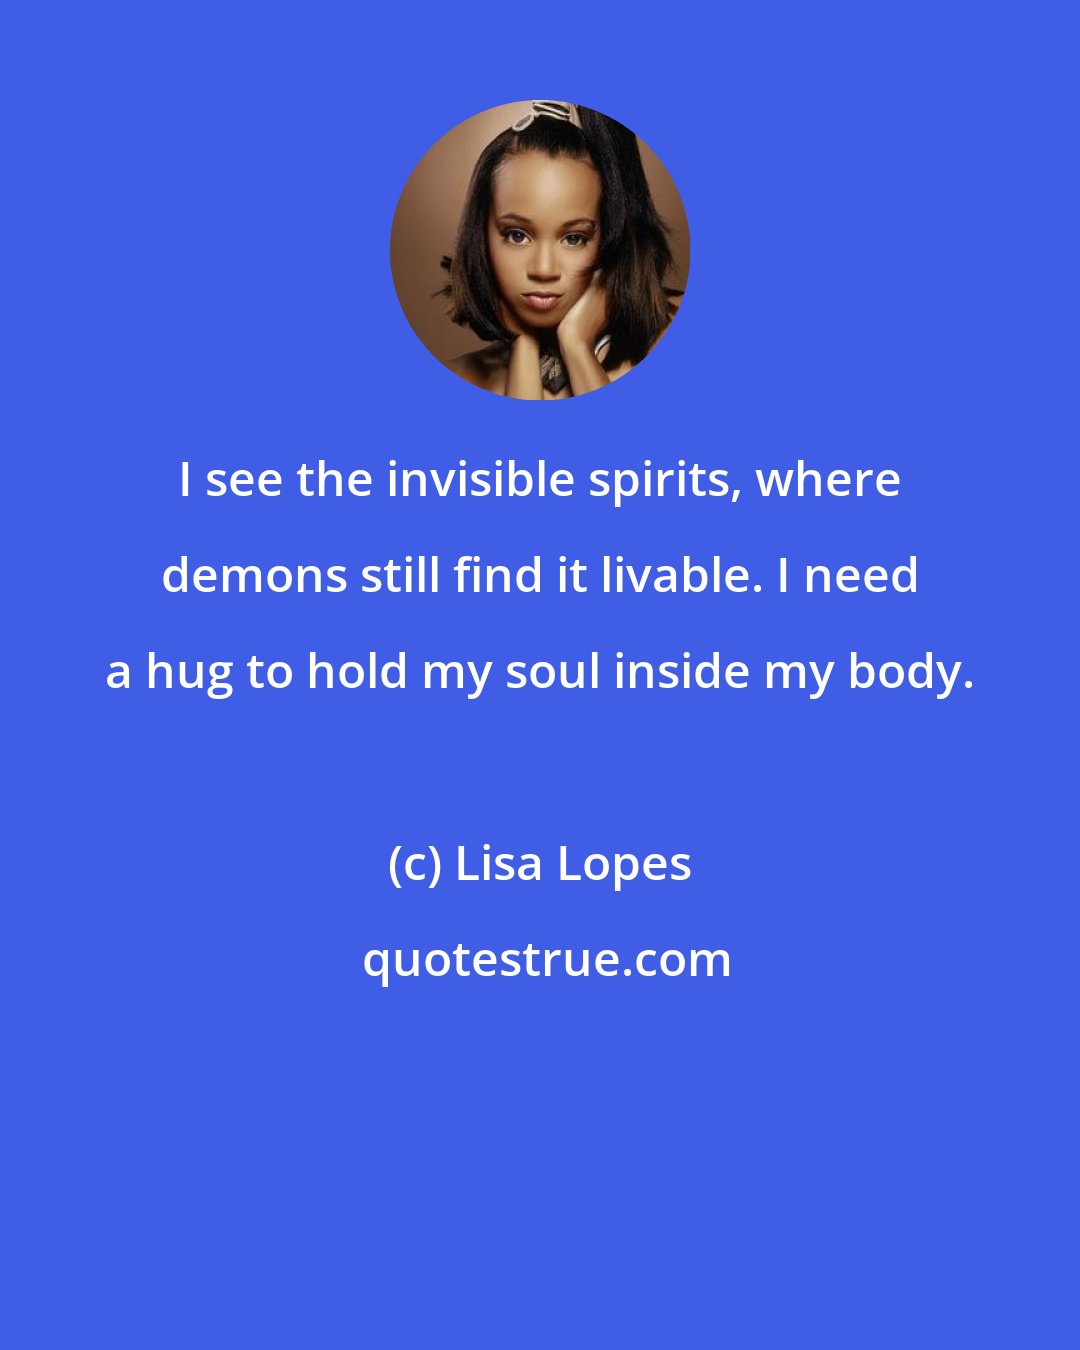 Lisa Lopes: I see the invisible spirits, where demons still find it livable. I need a hug to hold my soul inside my body.